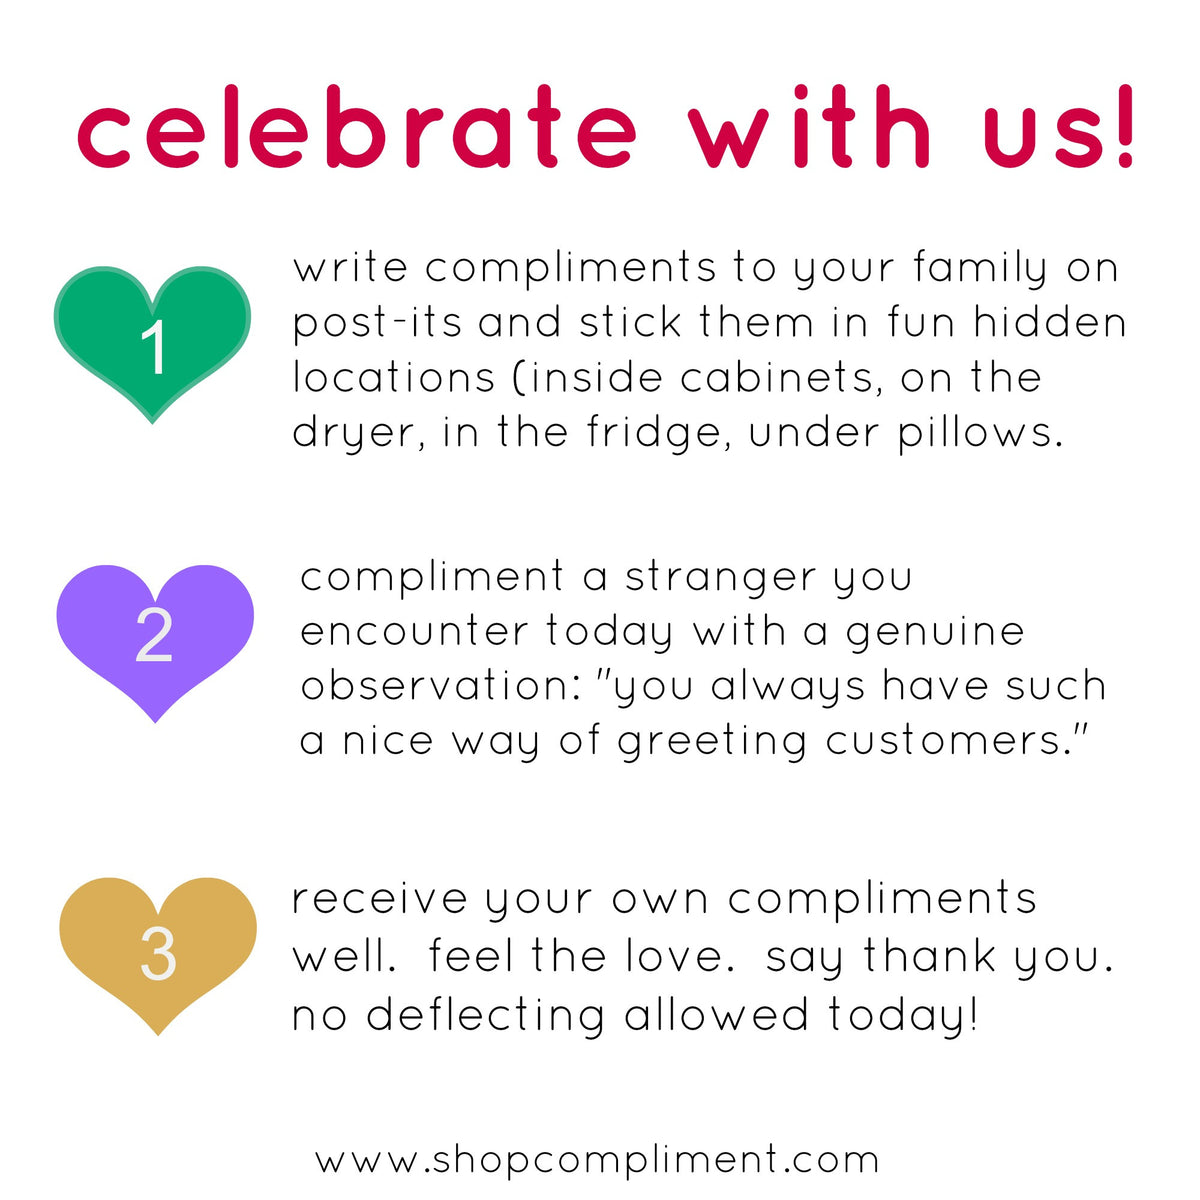 happy world compliment day!